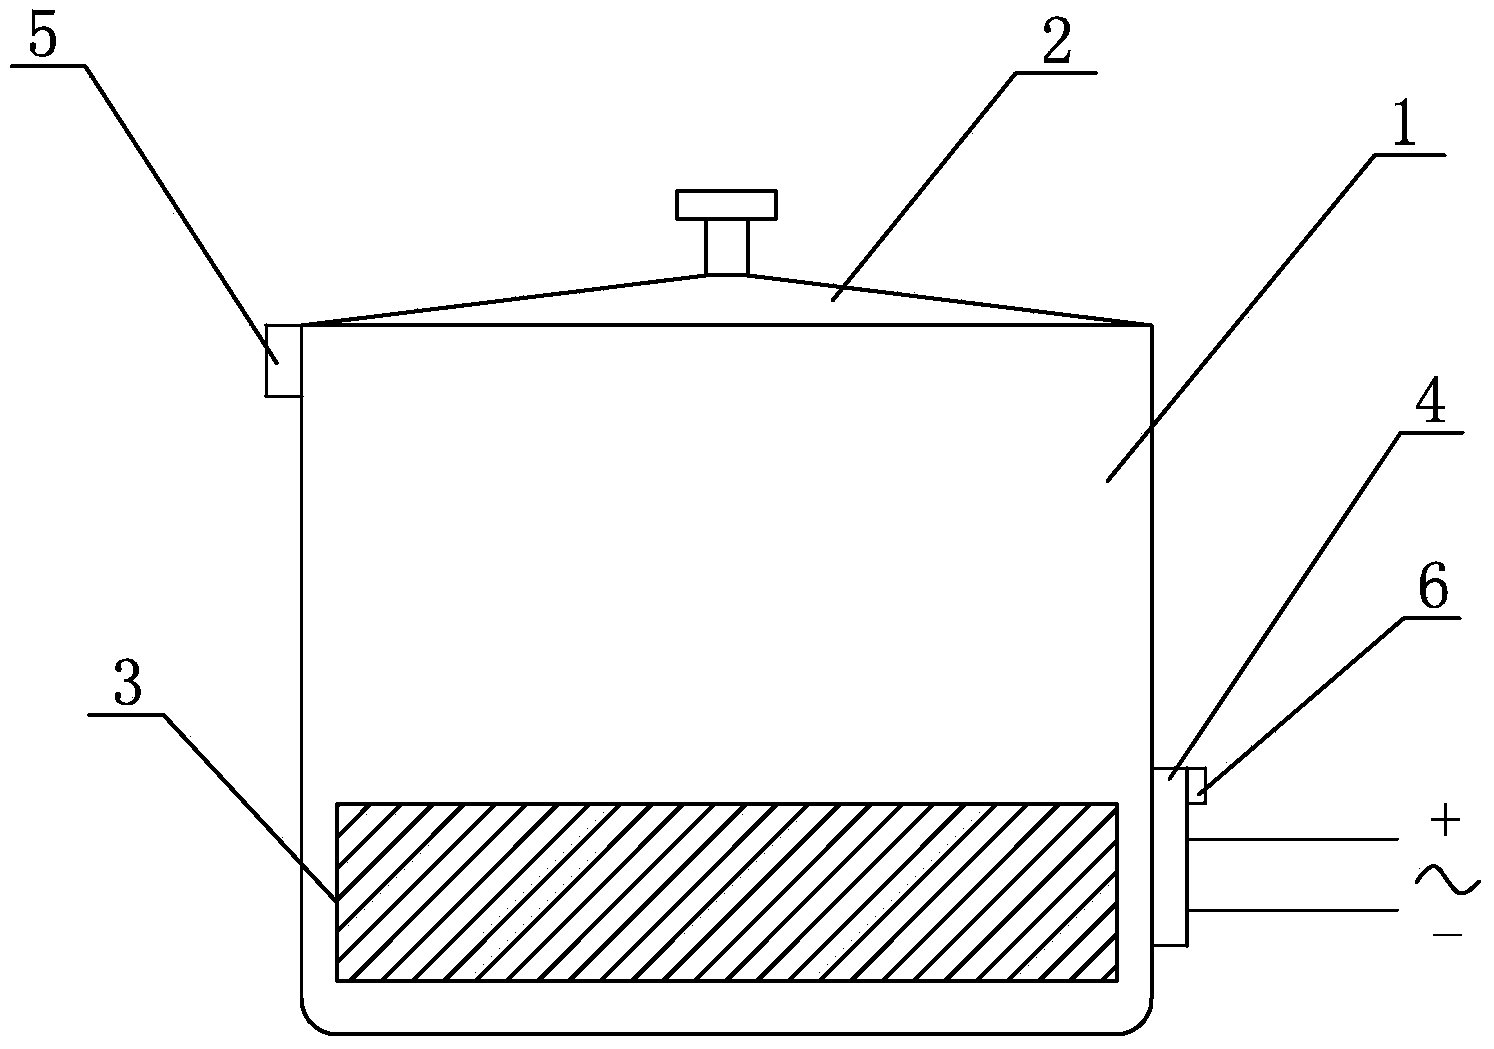 Automatic electric cooker with electrode heating function